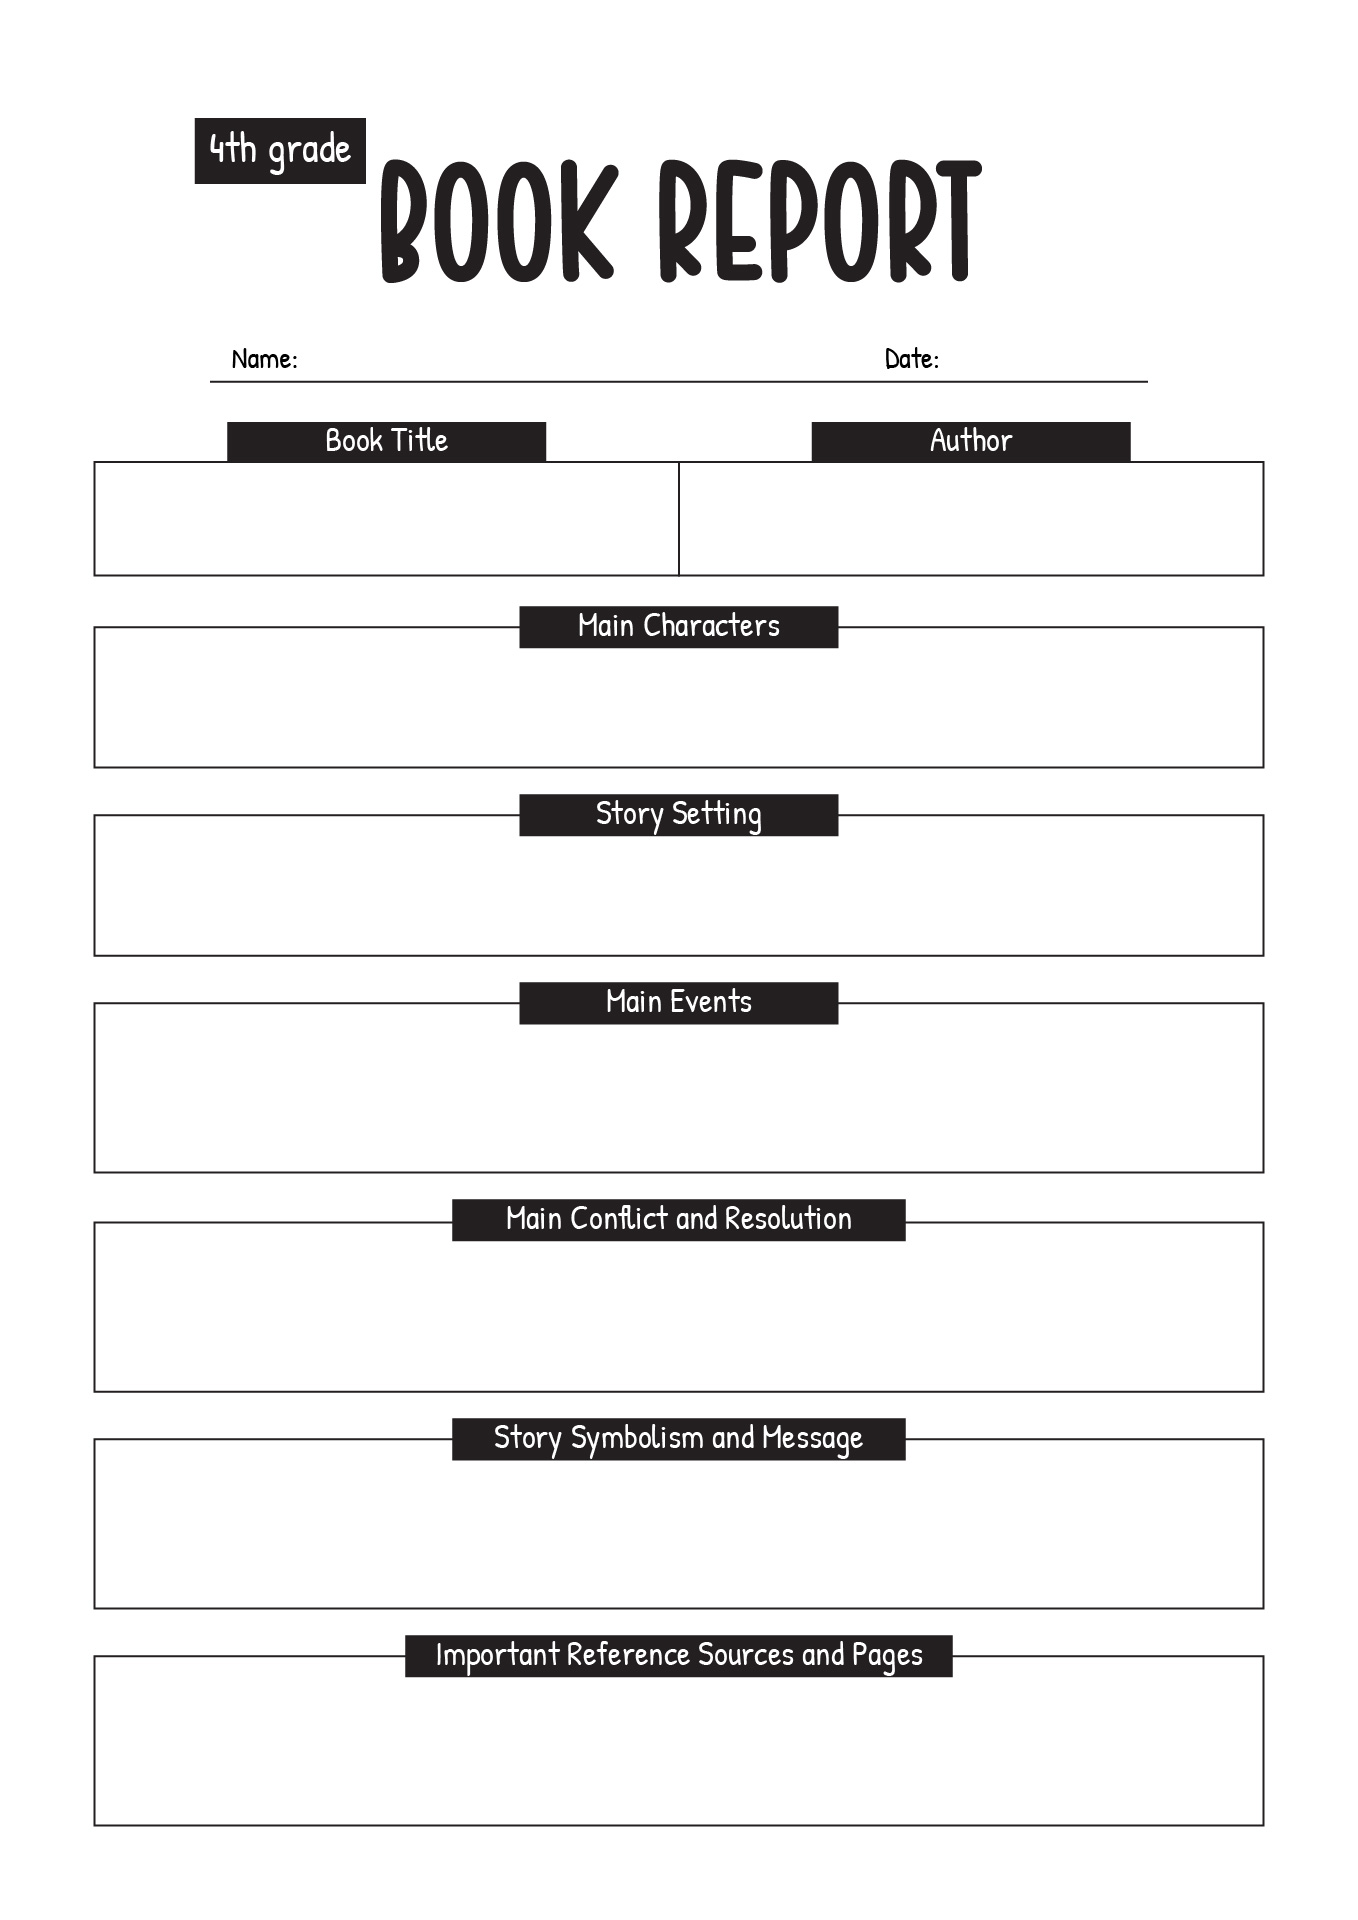 4th Grade Book Report Template for Students